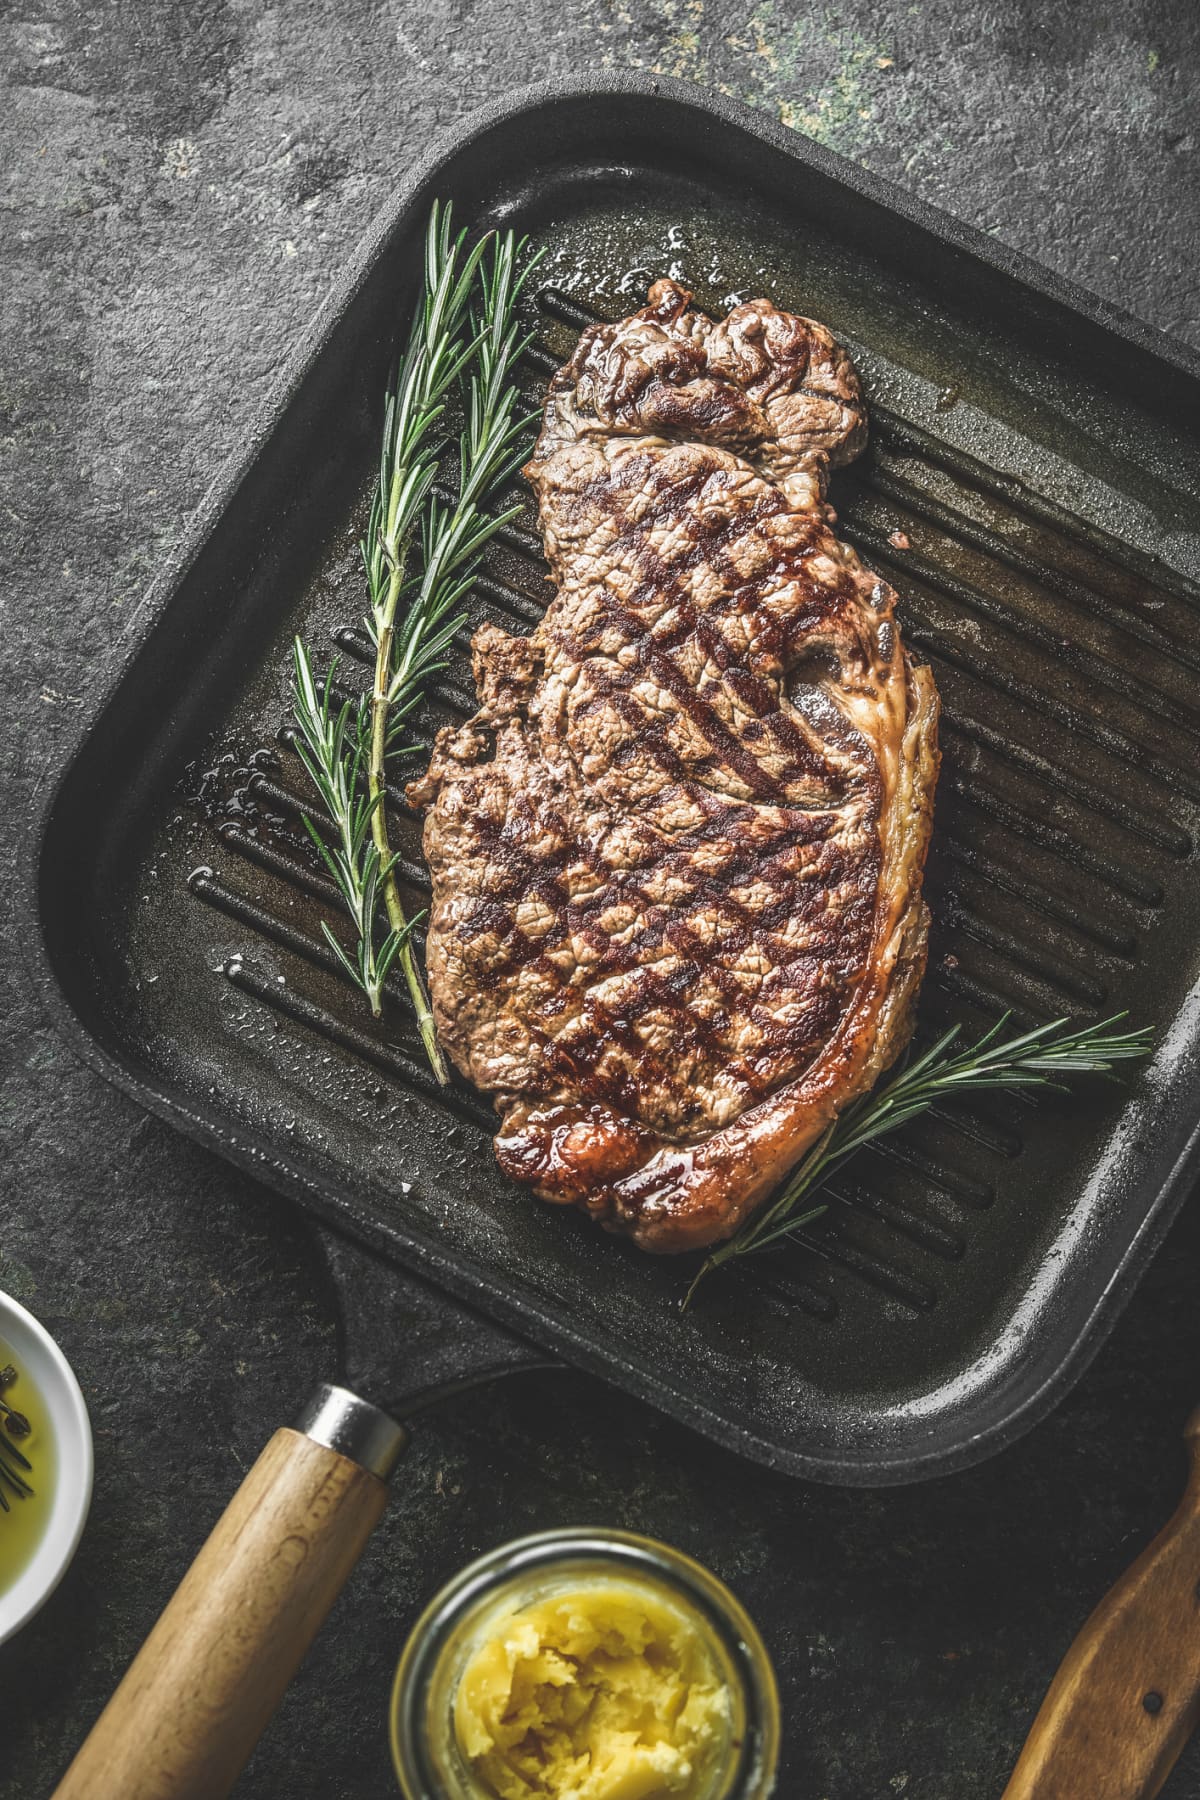 Roasted beef steak with rosemary in black cast iron pan at grey table with kitchen utensils and ingredients. Grilled steak with herbs. Preparing meat. Top view.